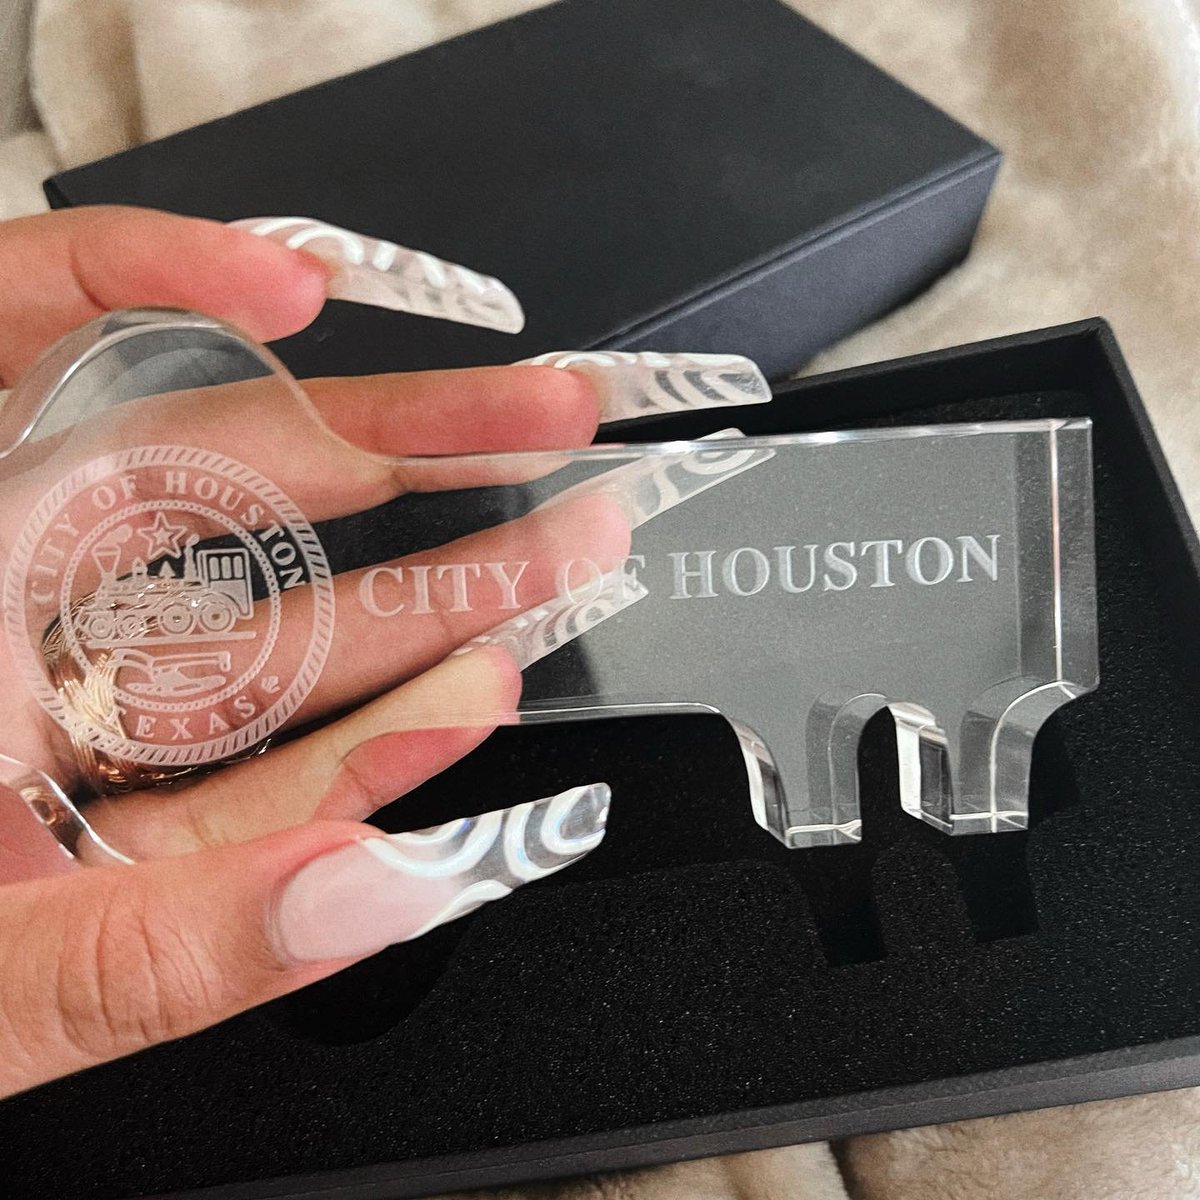 2 years ago today, Mayor Sylvester Turner announced that May 2nd will be known as 'Megan Thee Stallion Day' in Houston, Texas. She was honored with the key to the city. — The date that coincides with her mother and grandmother's birthday.